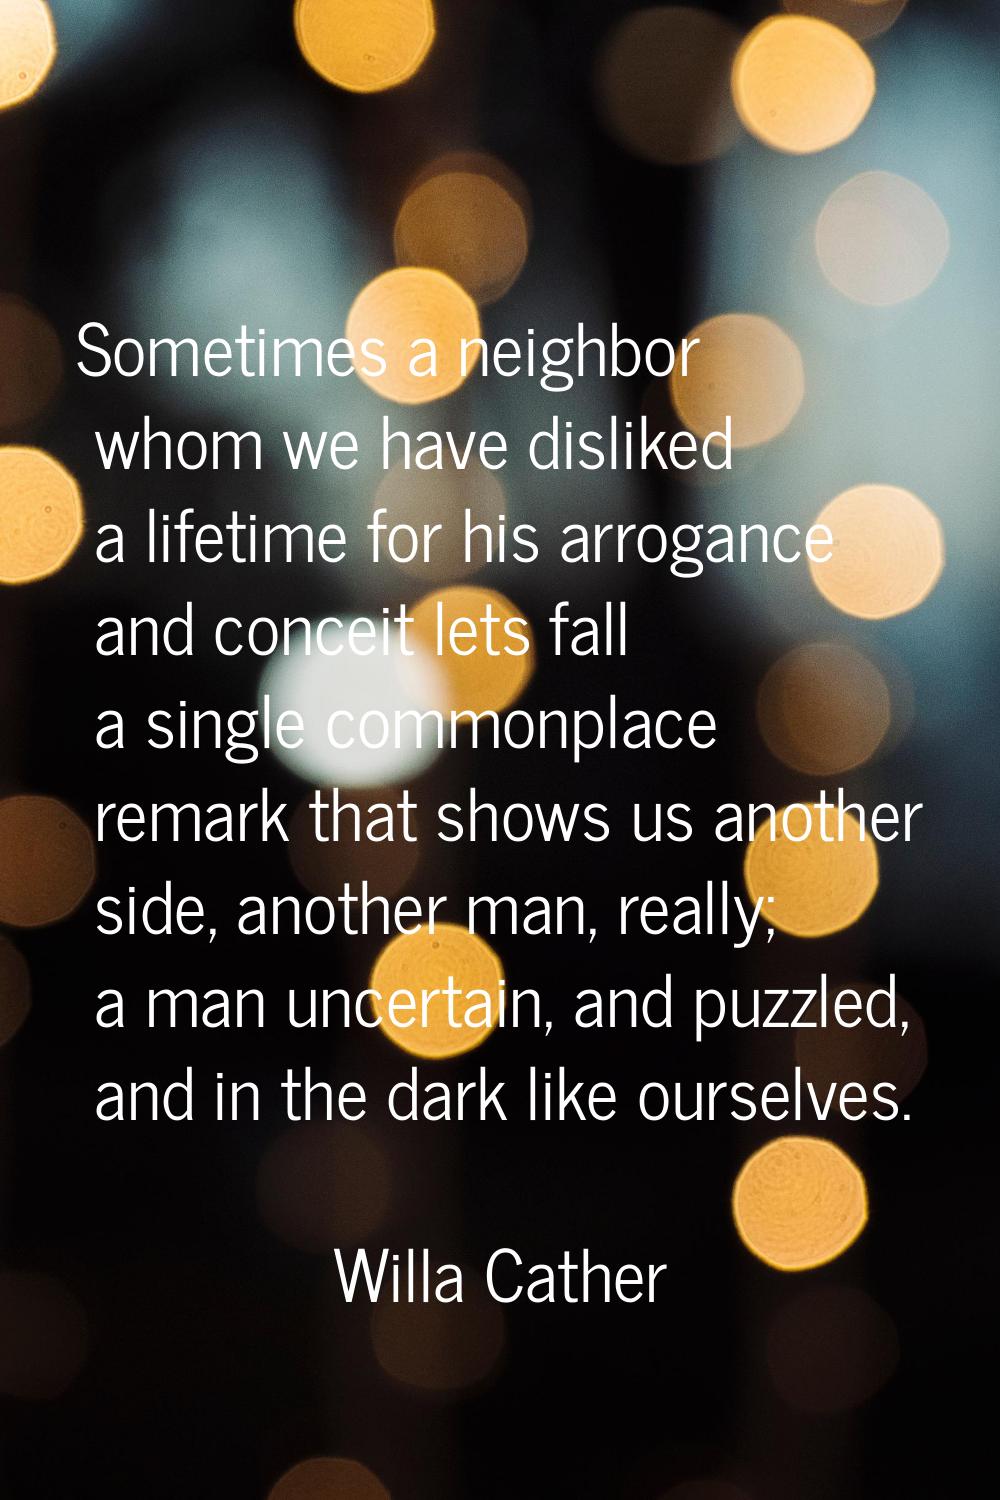 Sometimes a neighbor whom we have disliked a lifetime for his arrogance and conceit lets fall a sin